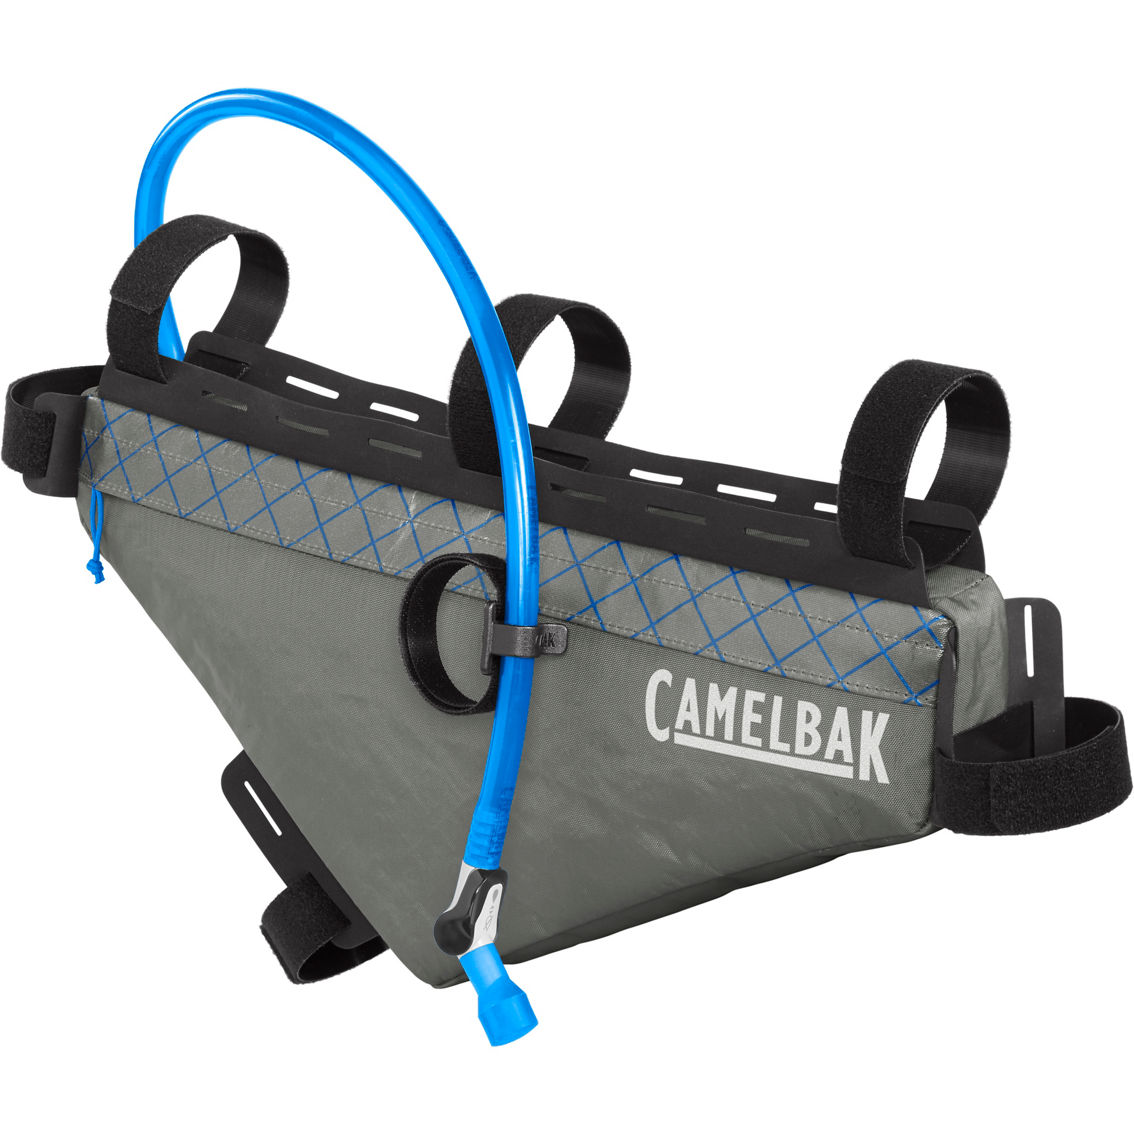 Camelbak M.U.L.E. Frame Pack with Quick Stow 2L Bike Reservoir - Image 2 of 8